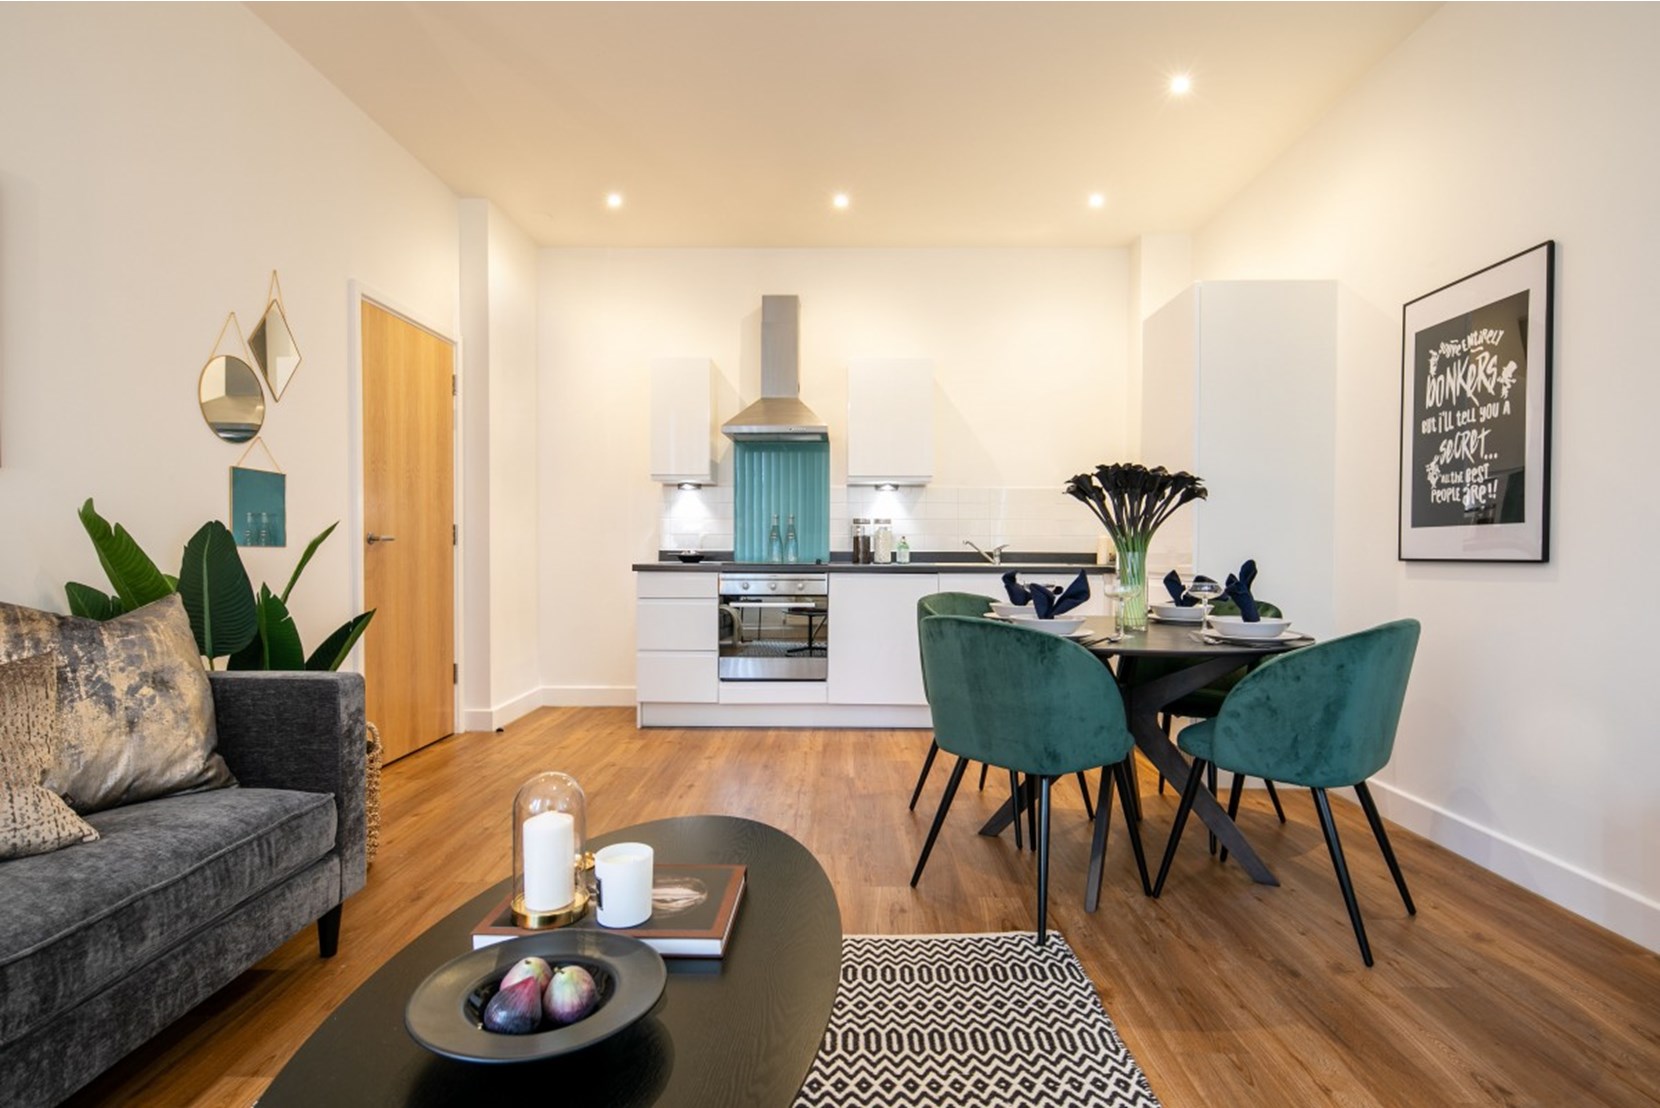 Apartment-Allsop-The-Keel-Liverpool-Merseyside-Kitchen-Dining-Living-Area